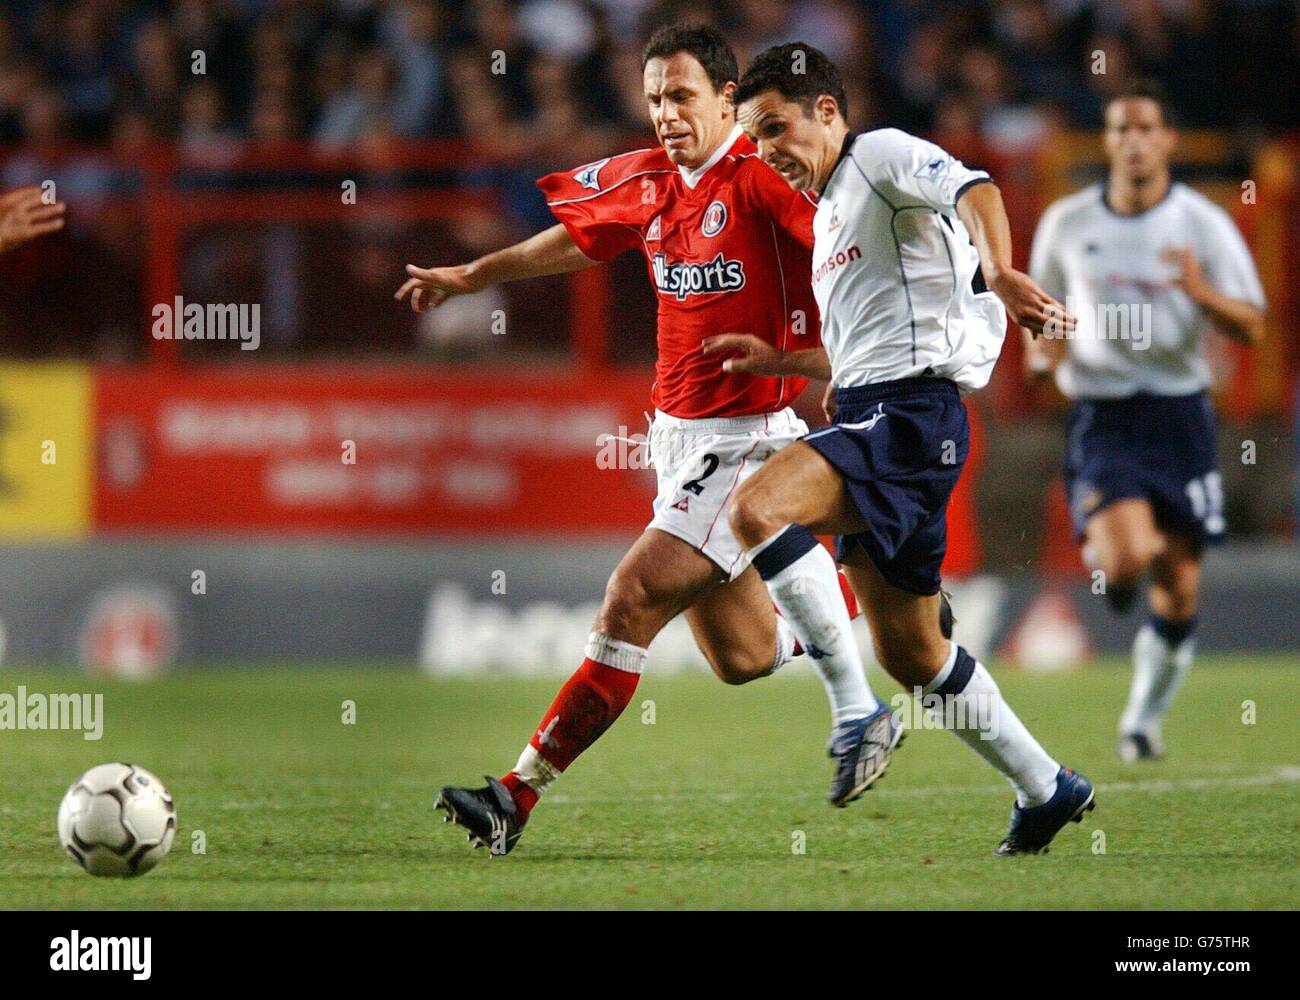 Tottenham Hotspur's Matthew Etherington battles for the ball with Charlton Athletic's Radostin Kishishev (left) during the FA Barclaycard Premiership game at The Valley, London.Tottenham Hotspur defeated Charlton Athletic 1-0. Stock Photo